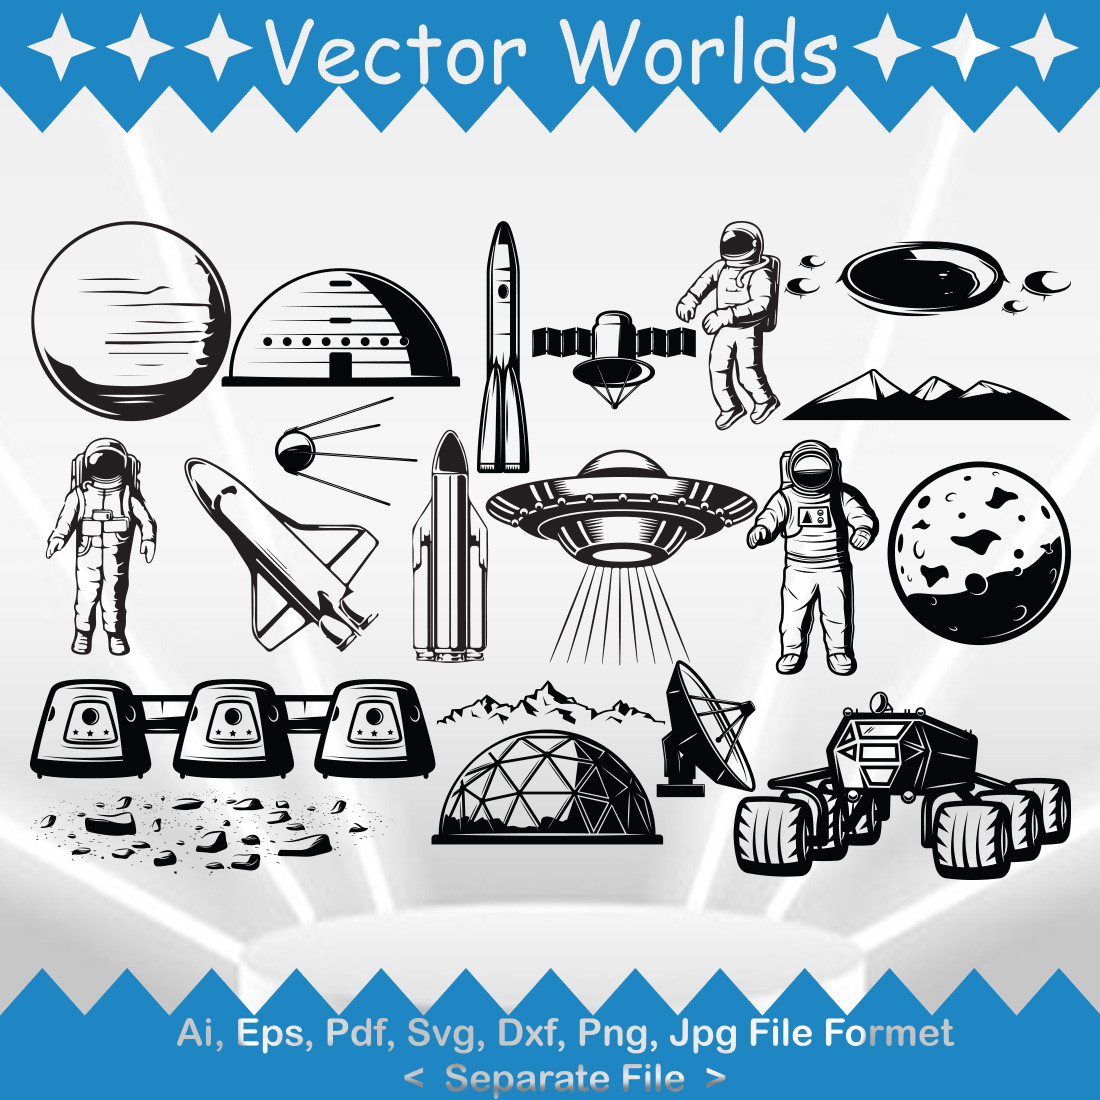 Spaceship SVG Vector Design cover image.